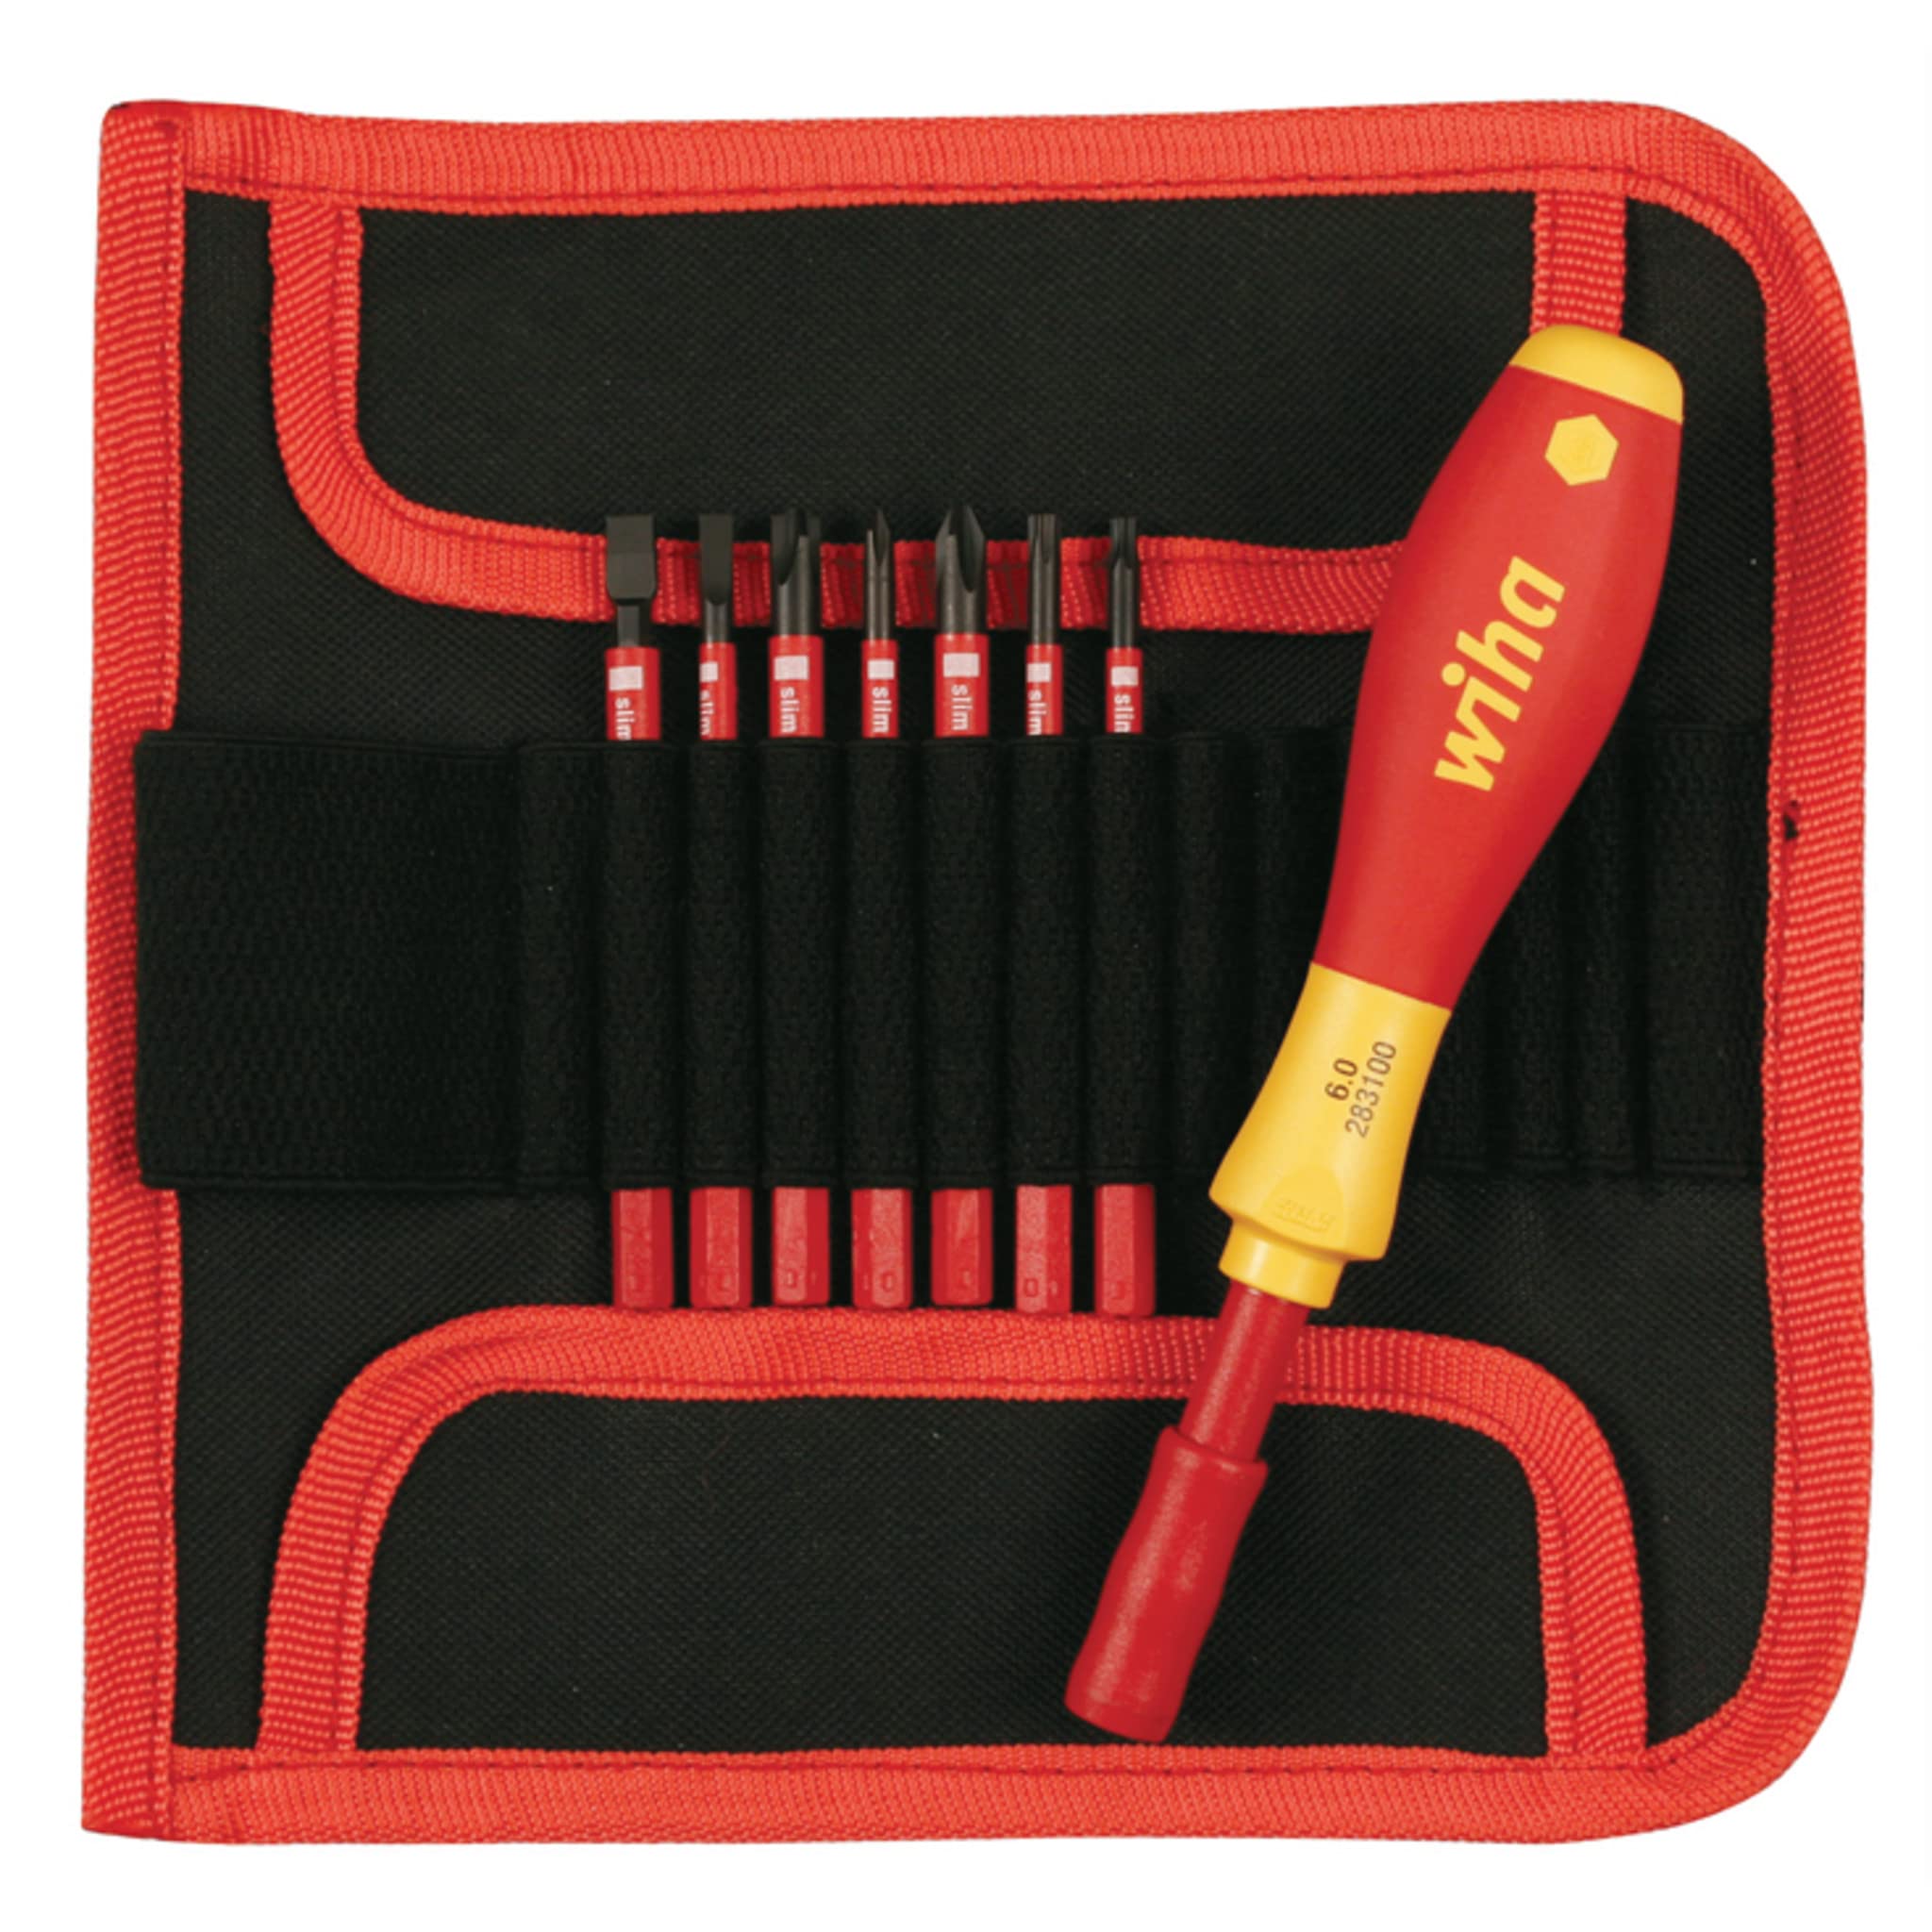 Wiha 28391 Insulated SlimLine Interchangeable Set Includes Handle with Pouch 8-Piece by Wiha並行輸入品